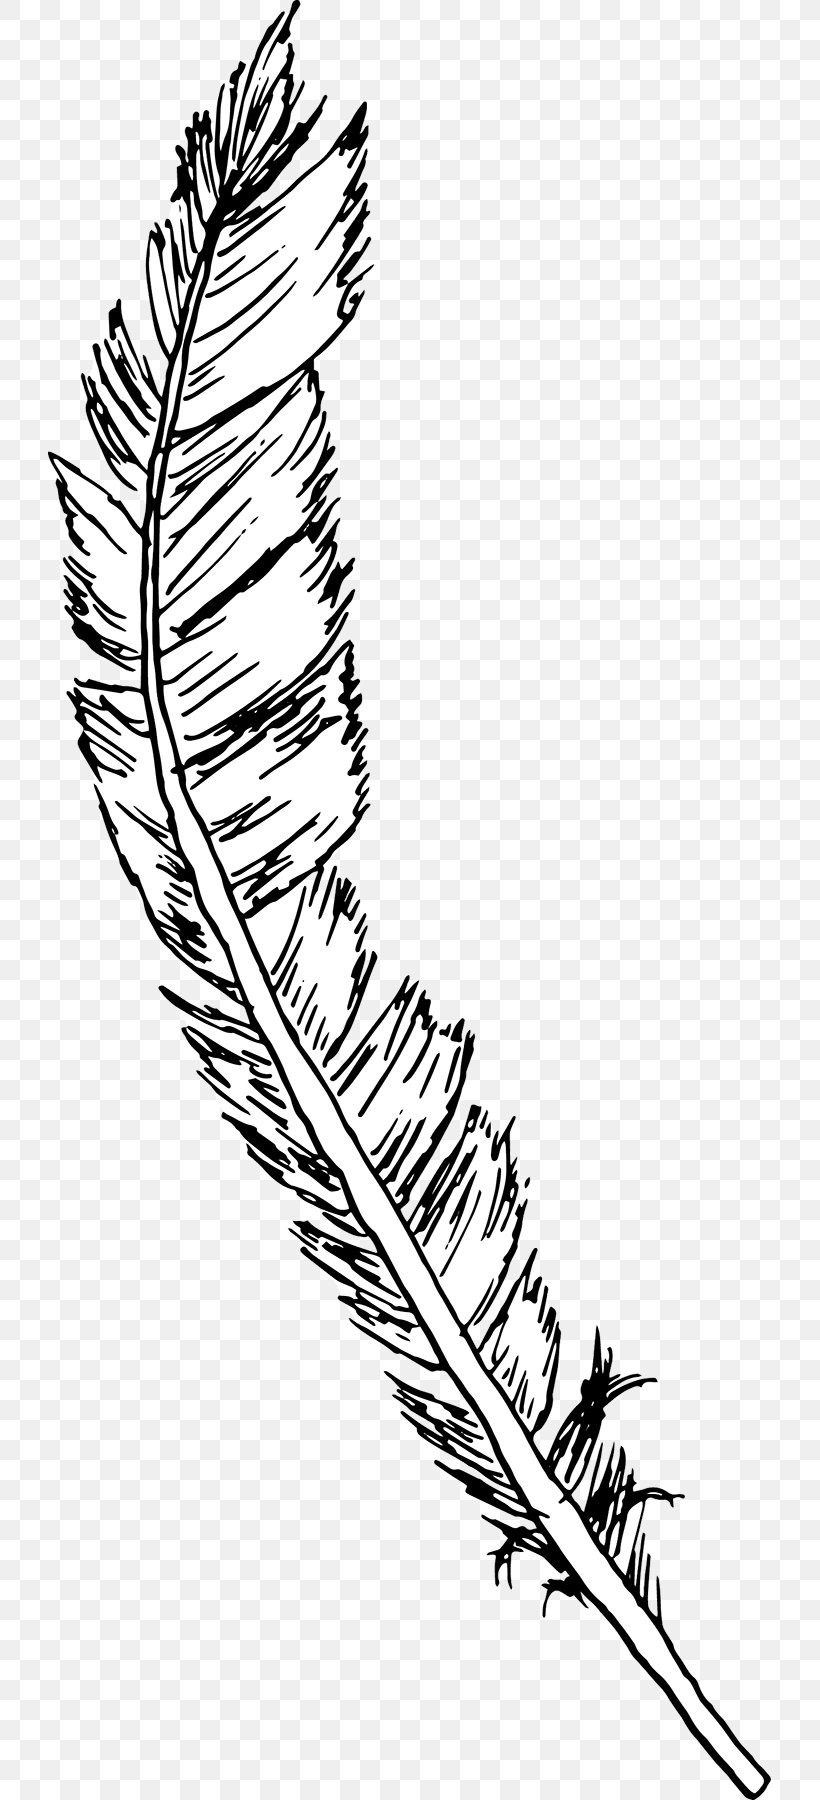 Drawing a bird feather line Royalty Free Vector Image